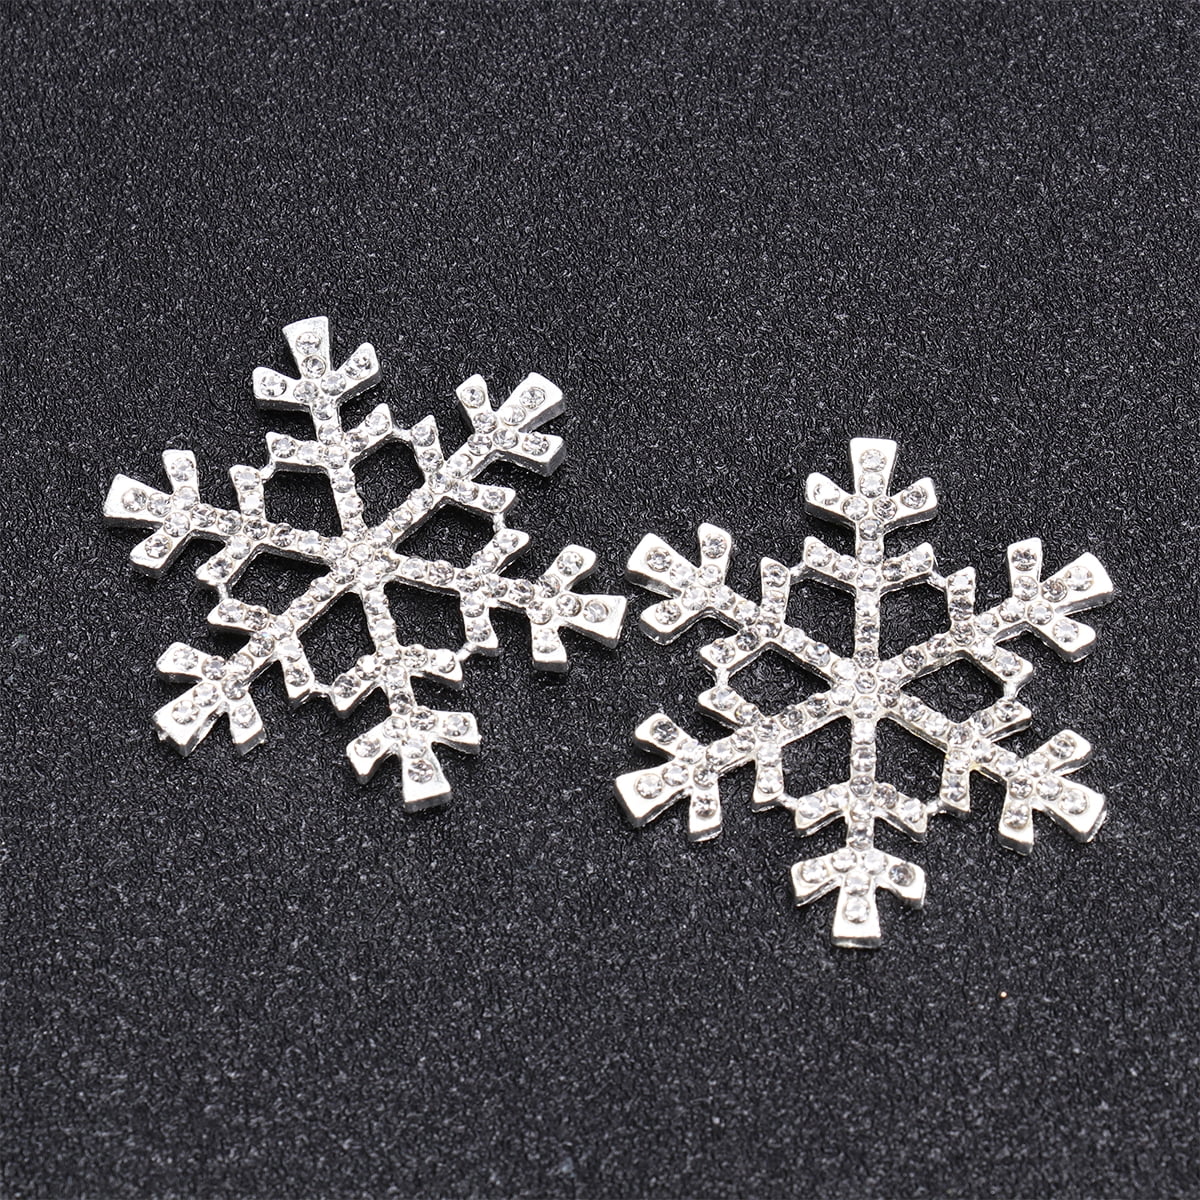 Artminds Glitter White Snowflakes Buttons and Embellishments Set of 12